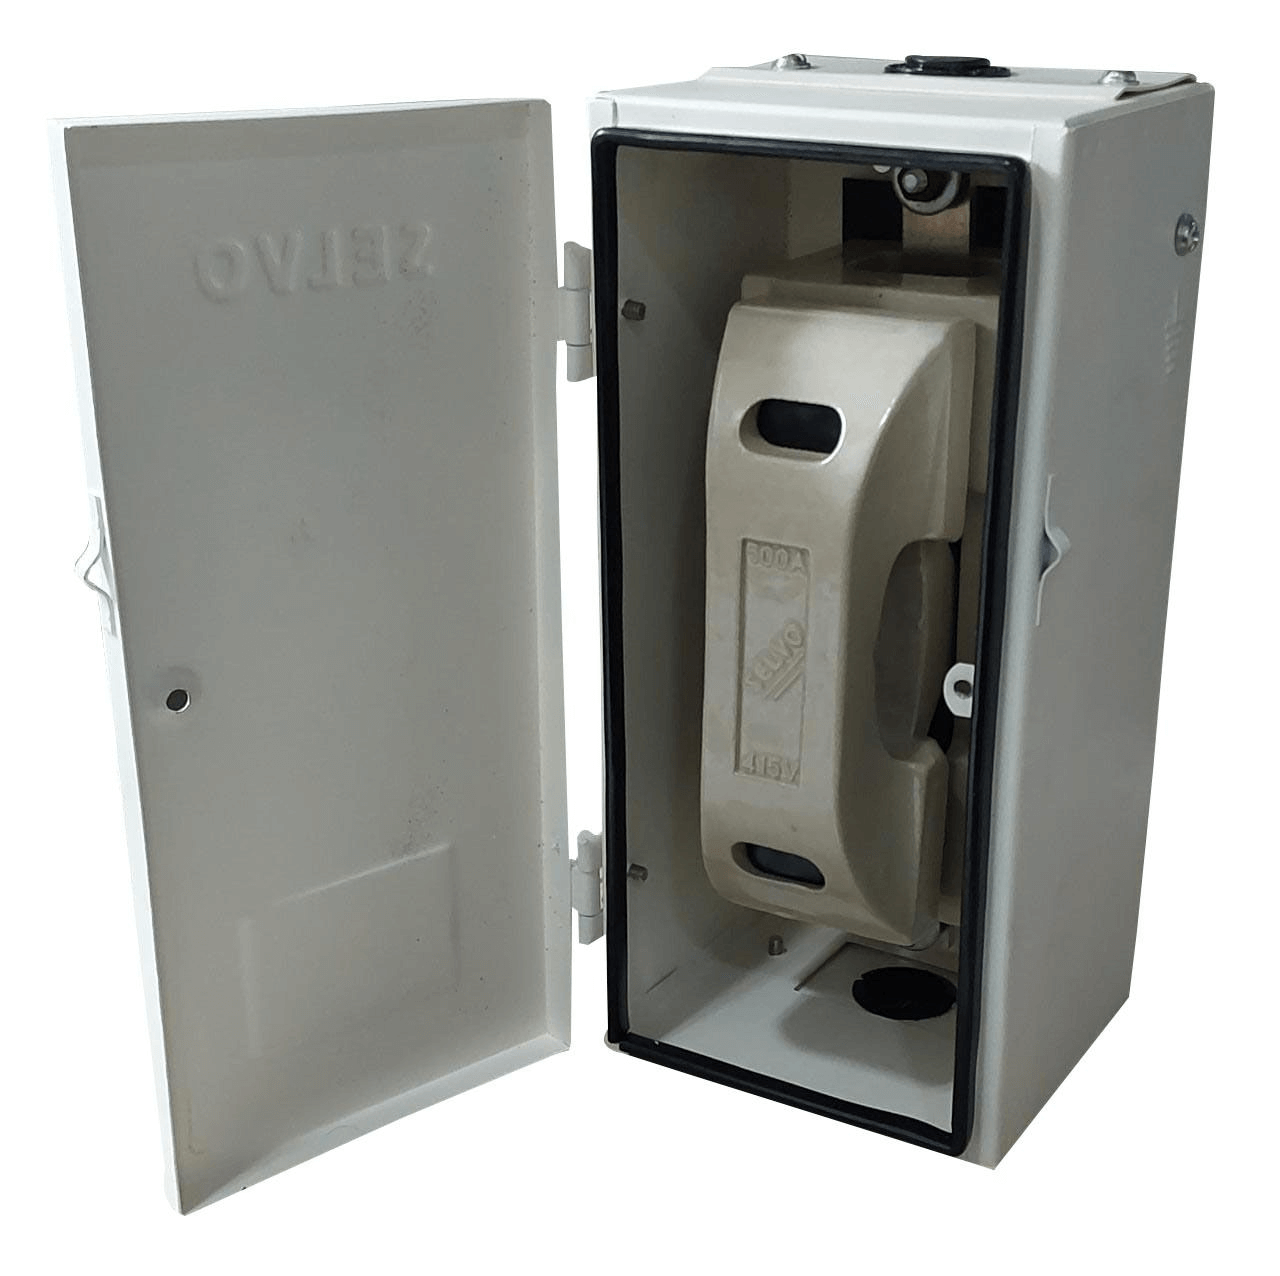 selvo-500a-sheet-metal-enclosure-with-kitkat-fuse-sel034